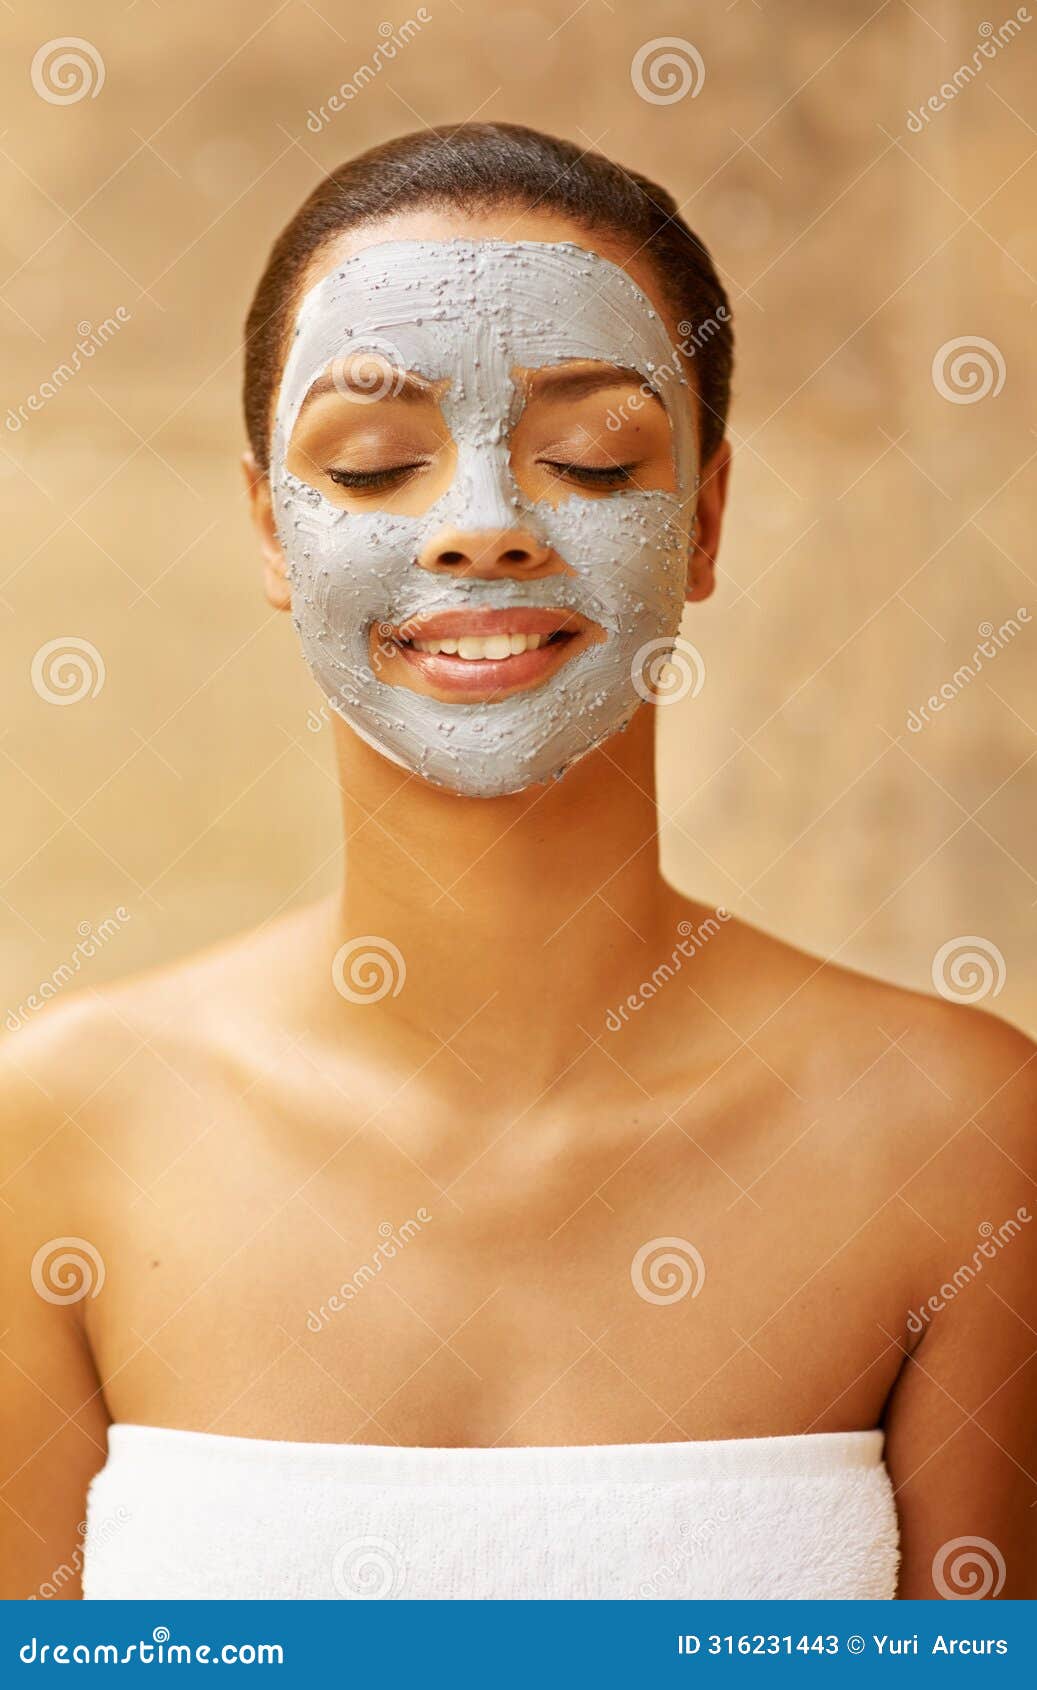 woman, exfoliate and mud mask at spa, facial treatment and detox or cleaning dermatology. female person, self care and